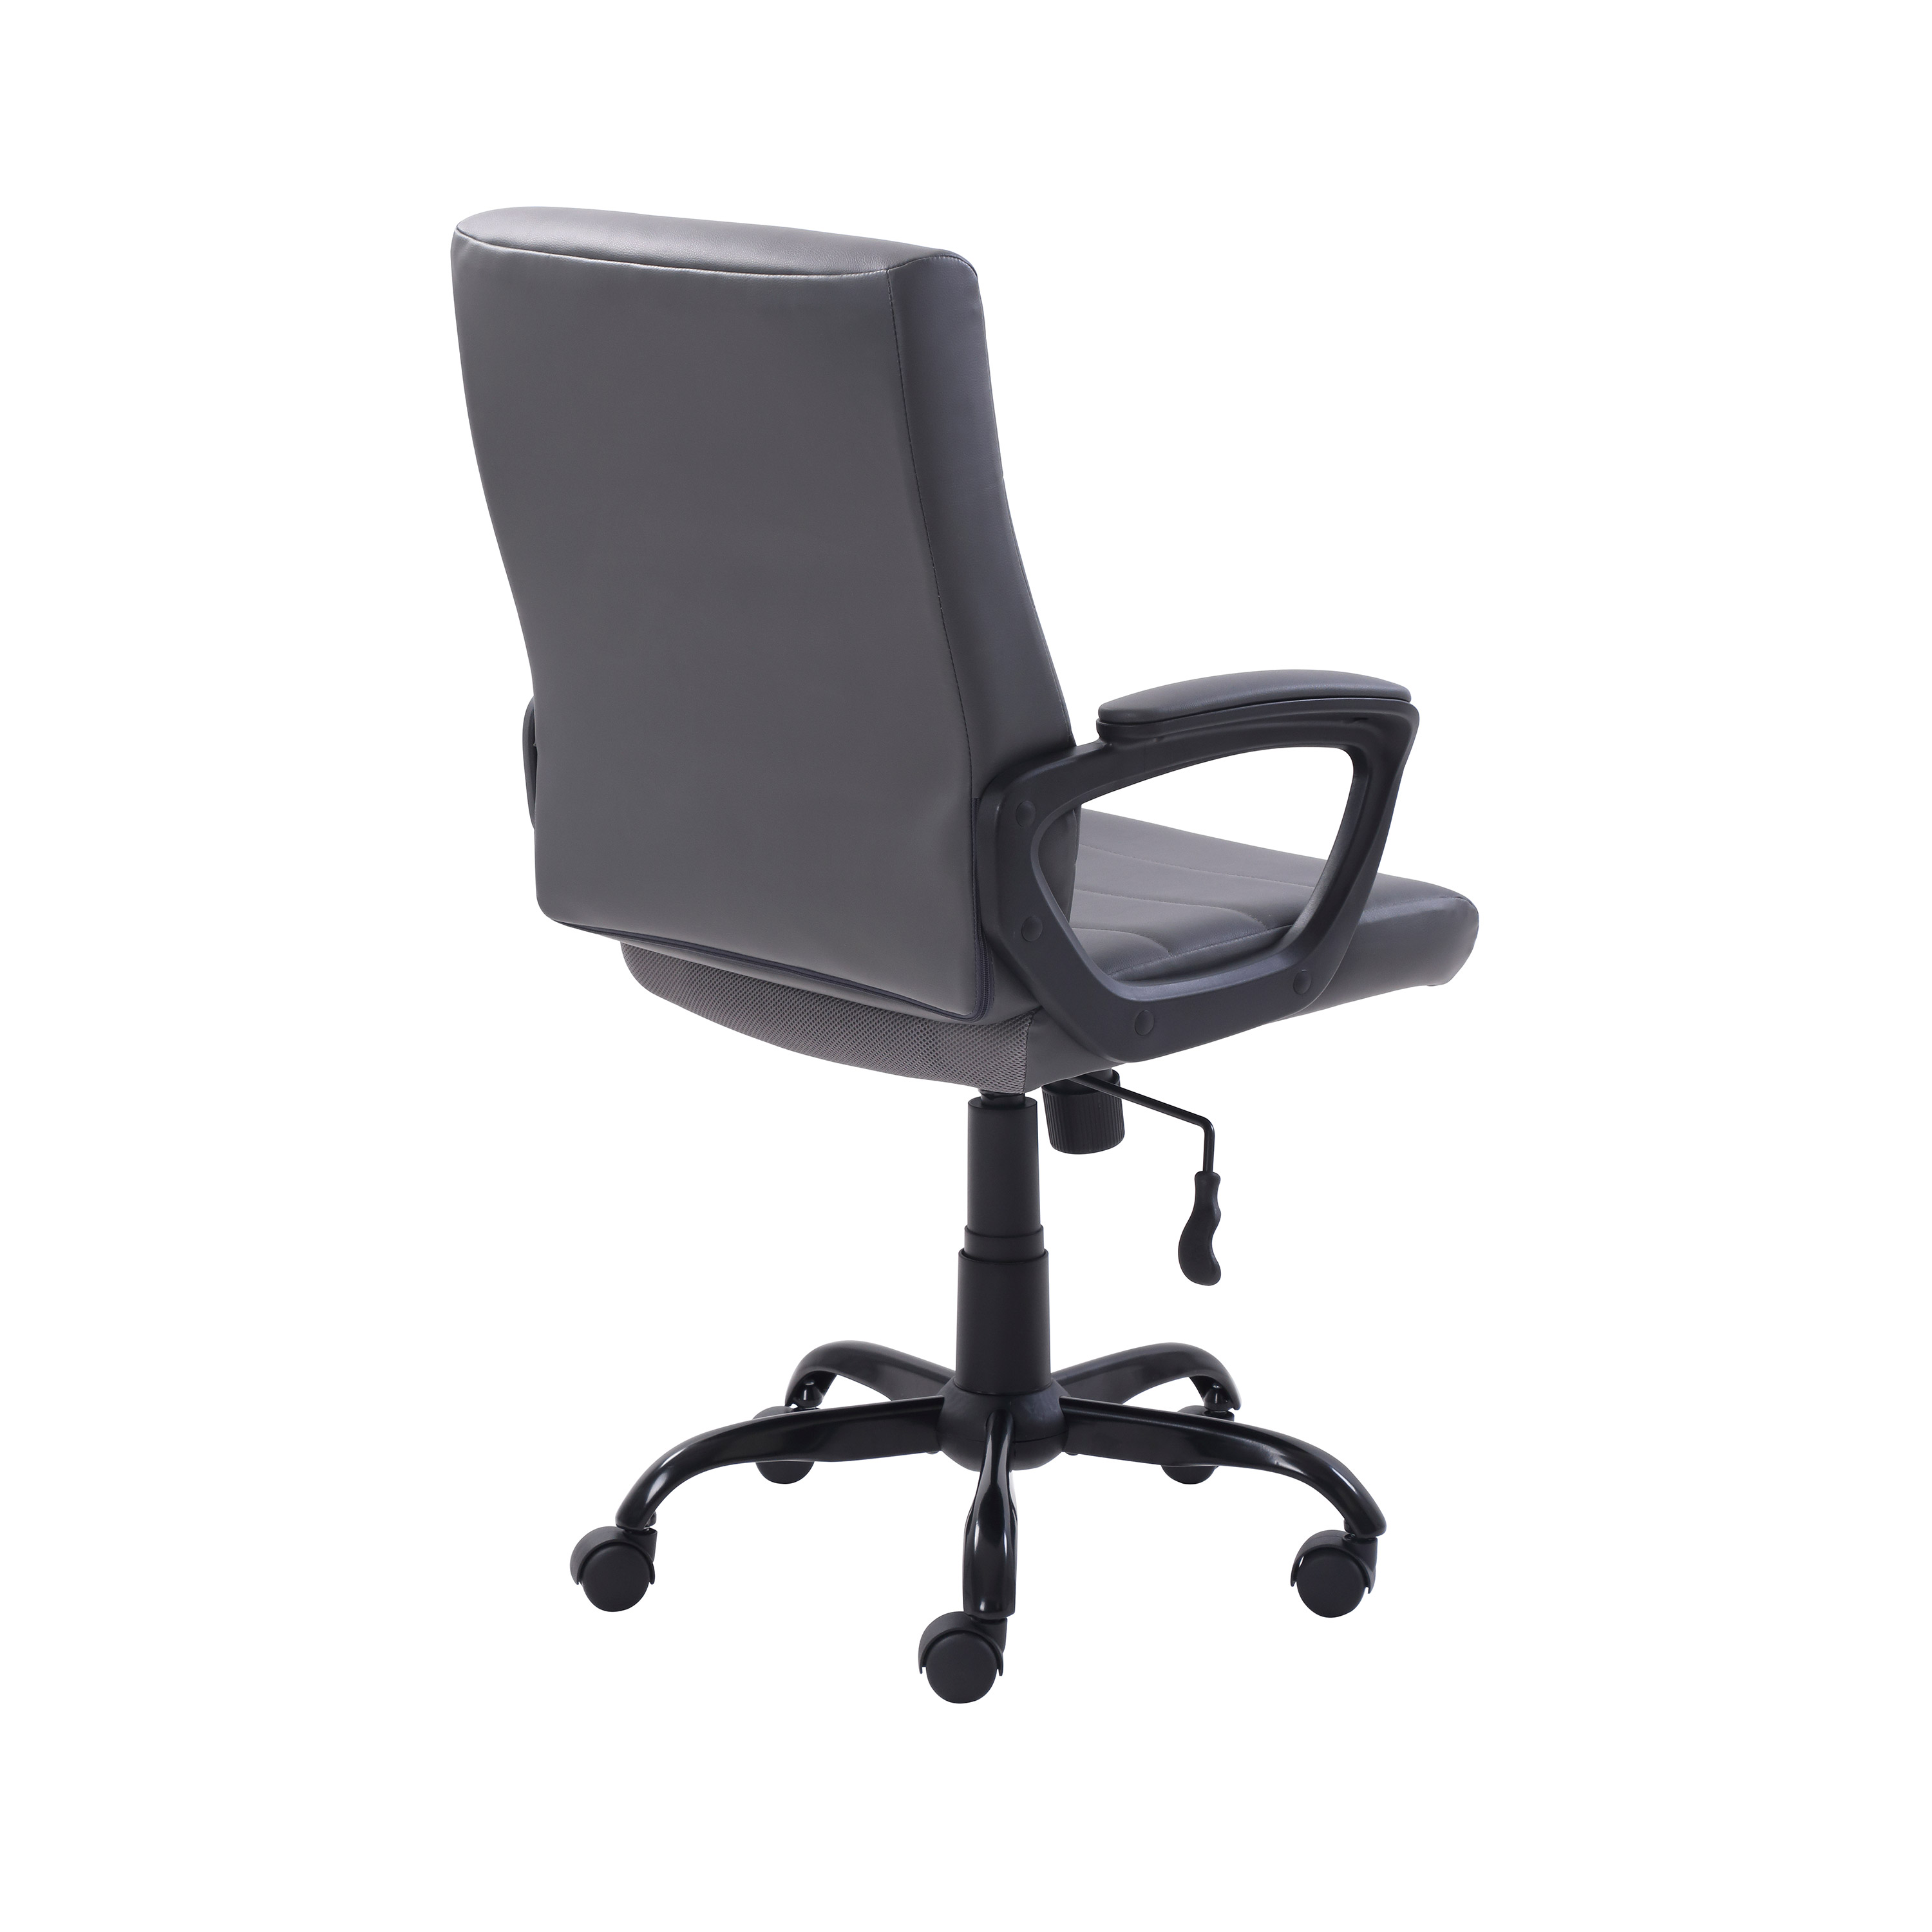 Mainstays Bonded Leather Mid-Back Manager's Office Chair, Gray - image 10 of 11